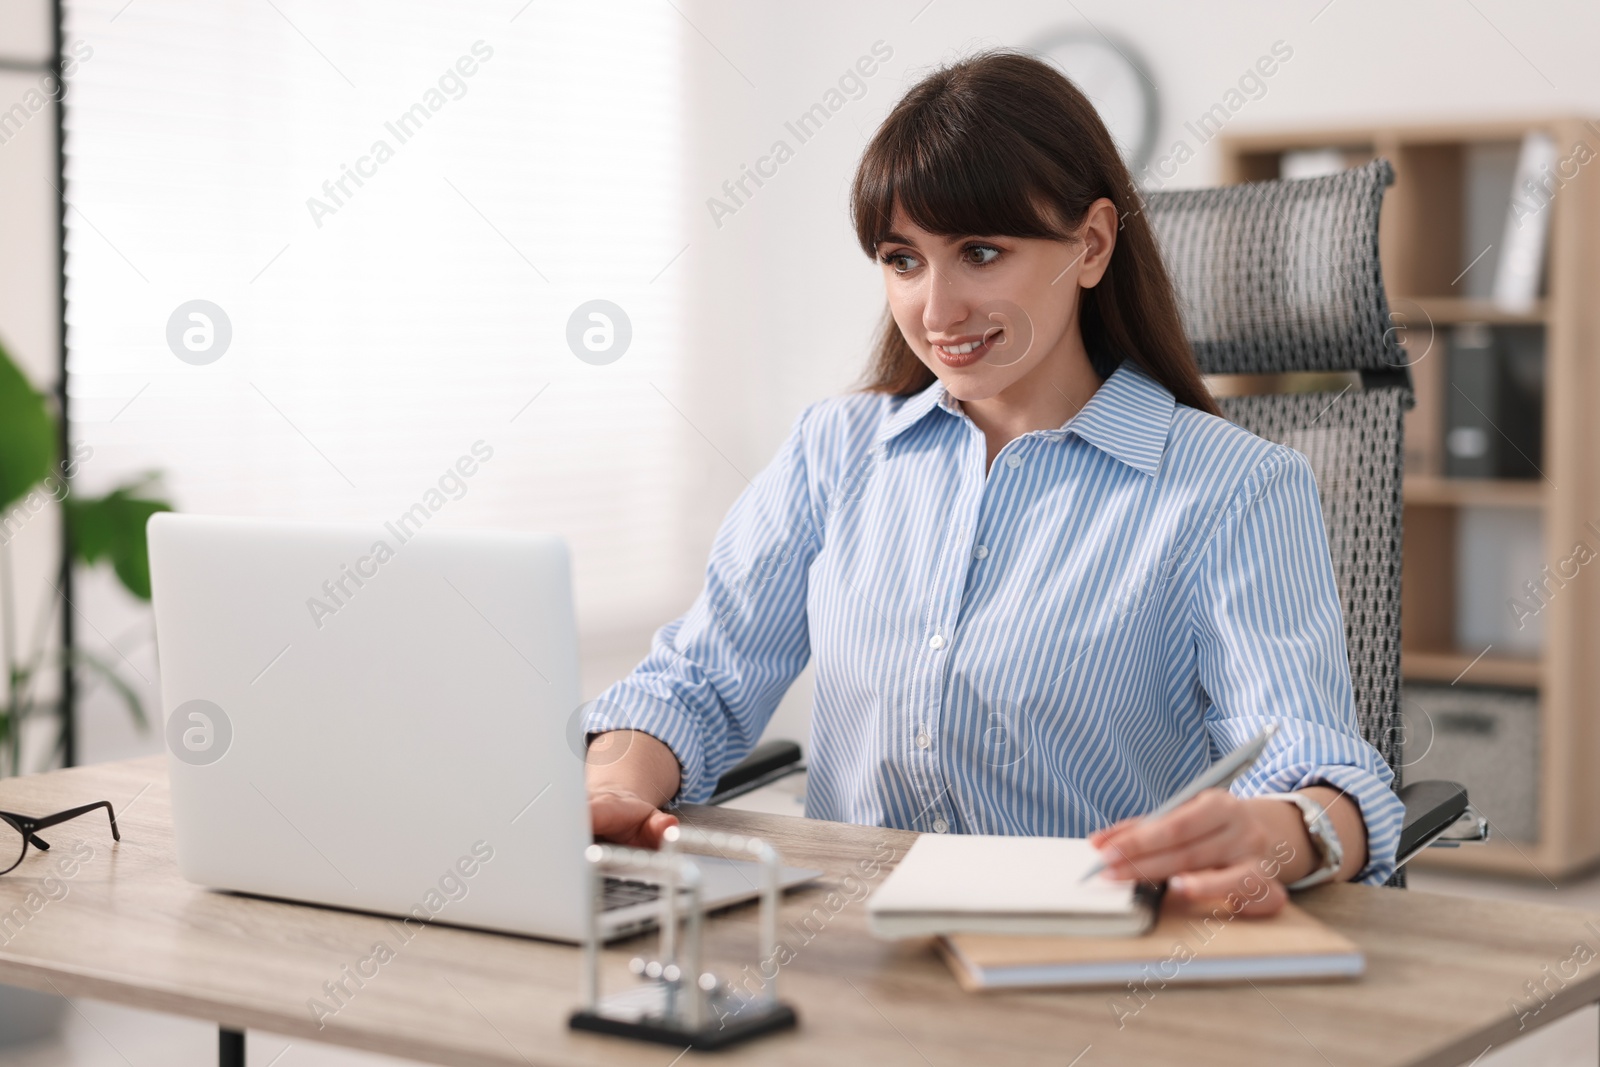 Photo of Woman taking notes during webinar at wooden table indoors